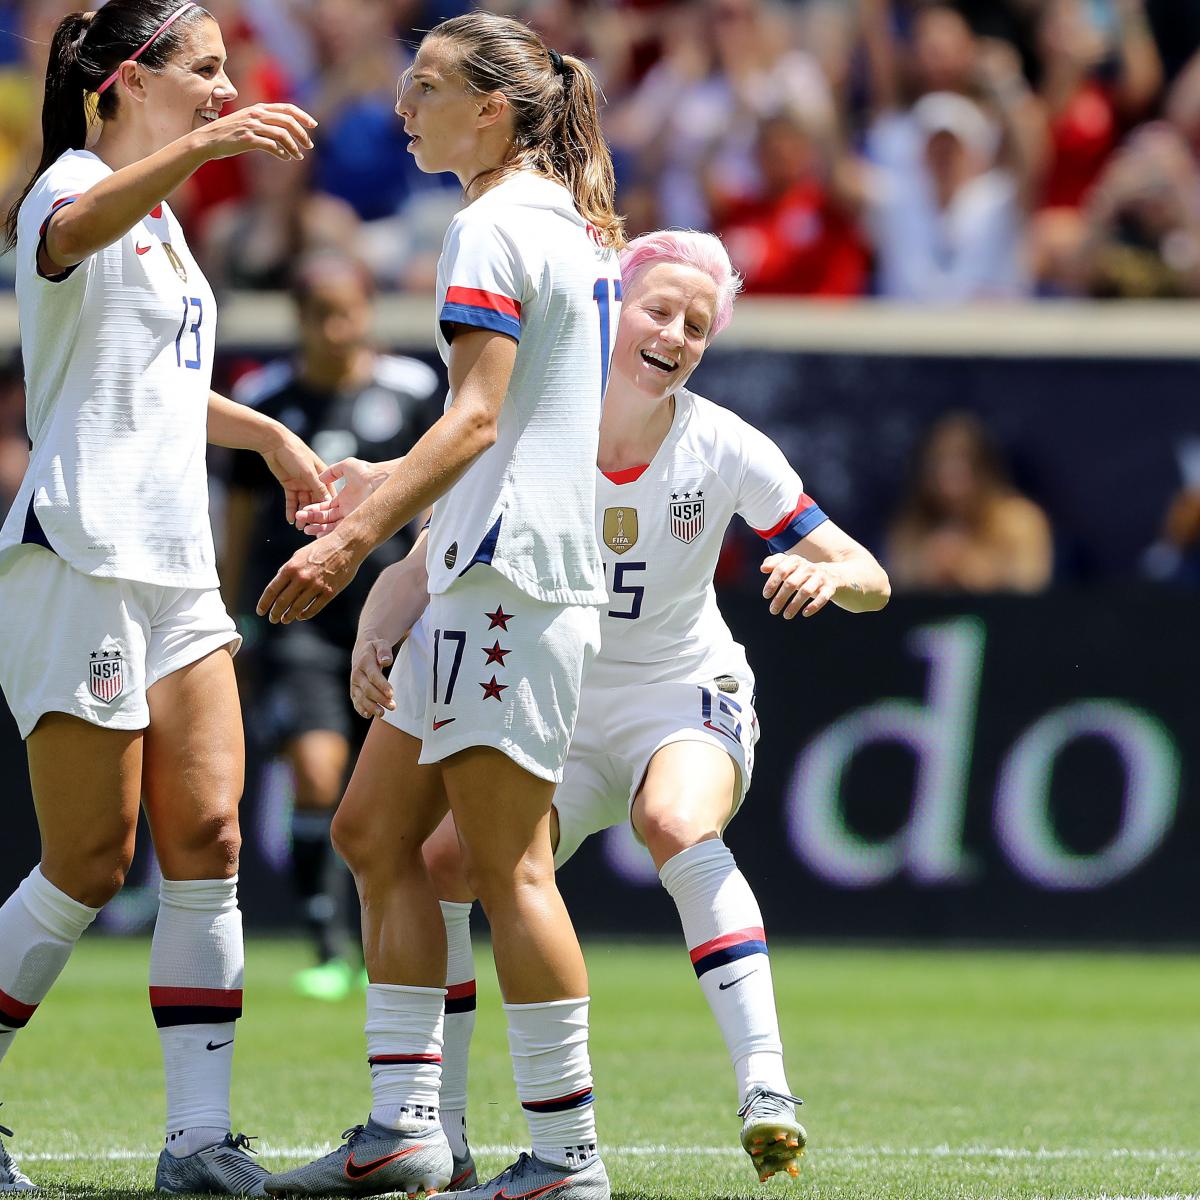 Usa Women S Soccer Roster 2019 Uswnt Jerseys Top Players And Reserves Bleacher Report Latest News Videos And Highlights